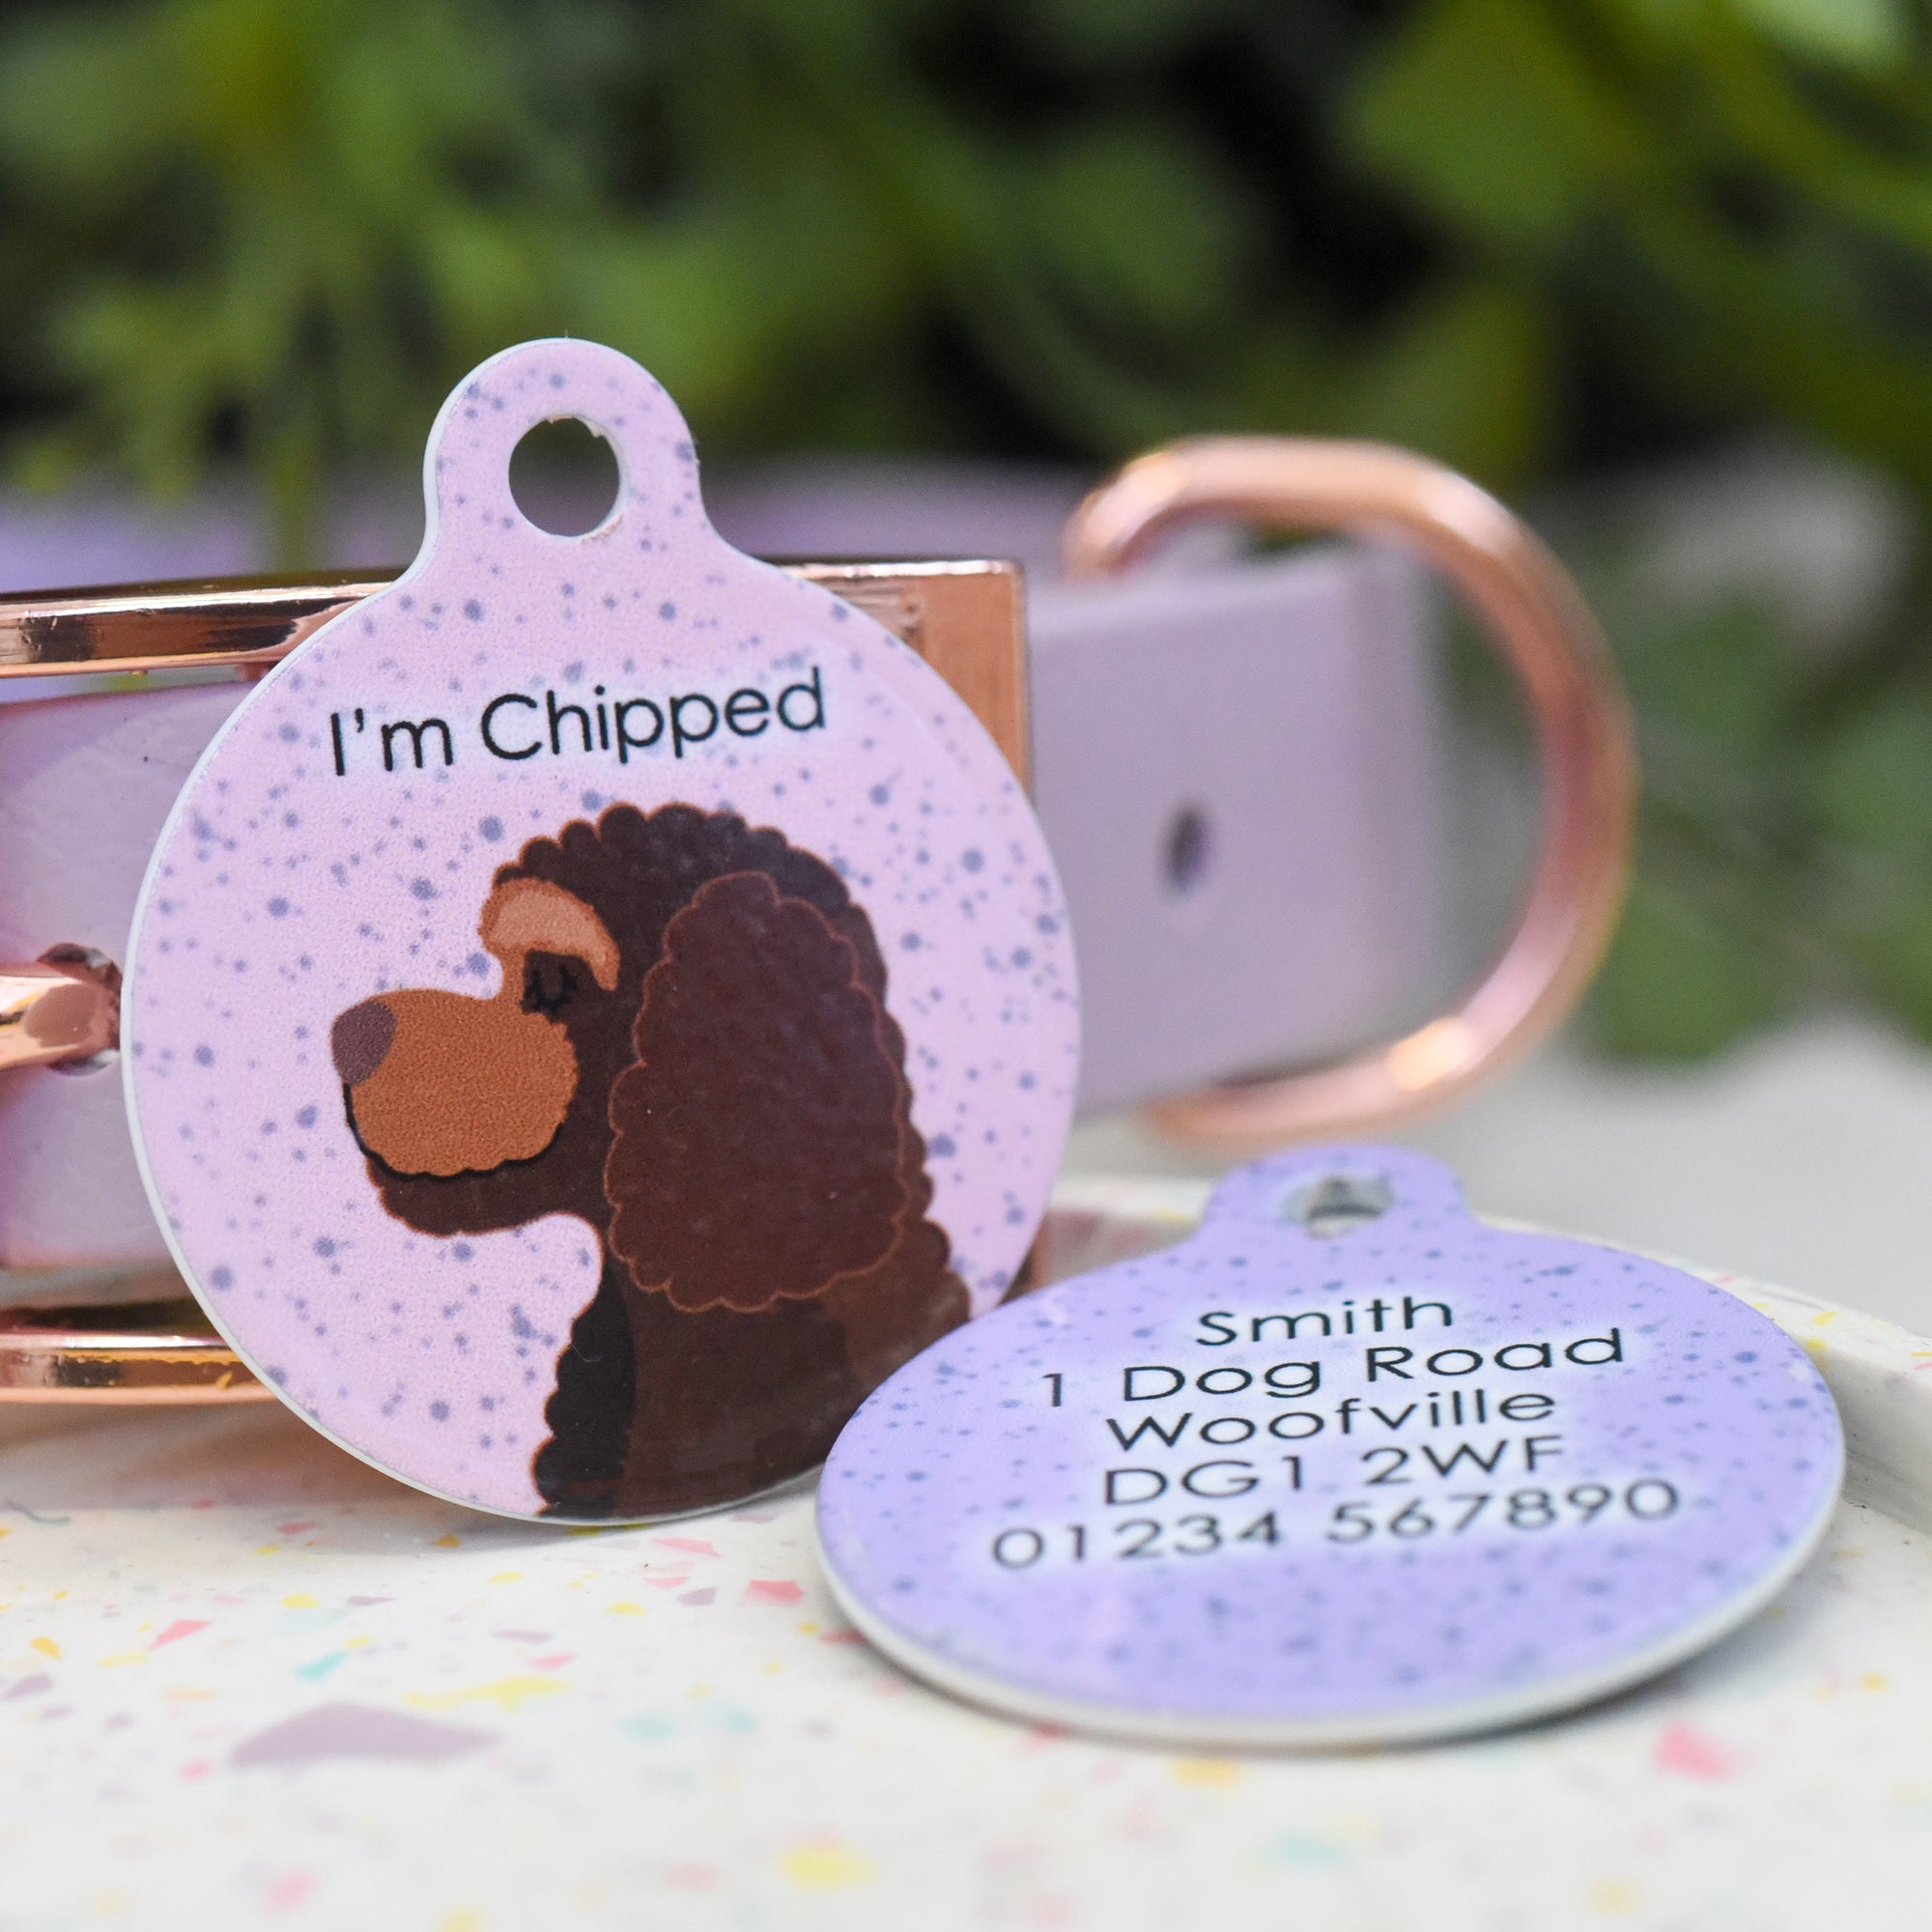 Cockapoo Personalised Dog Tag - Speckled